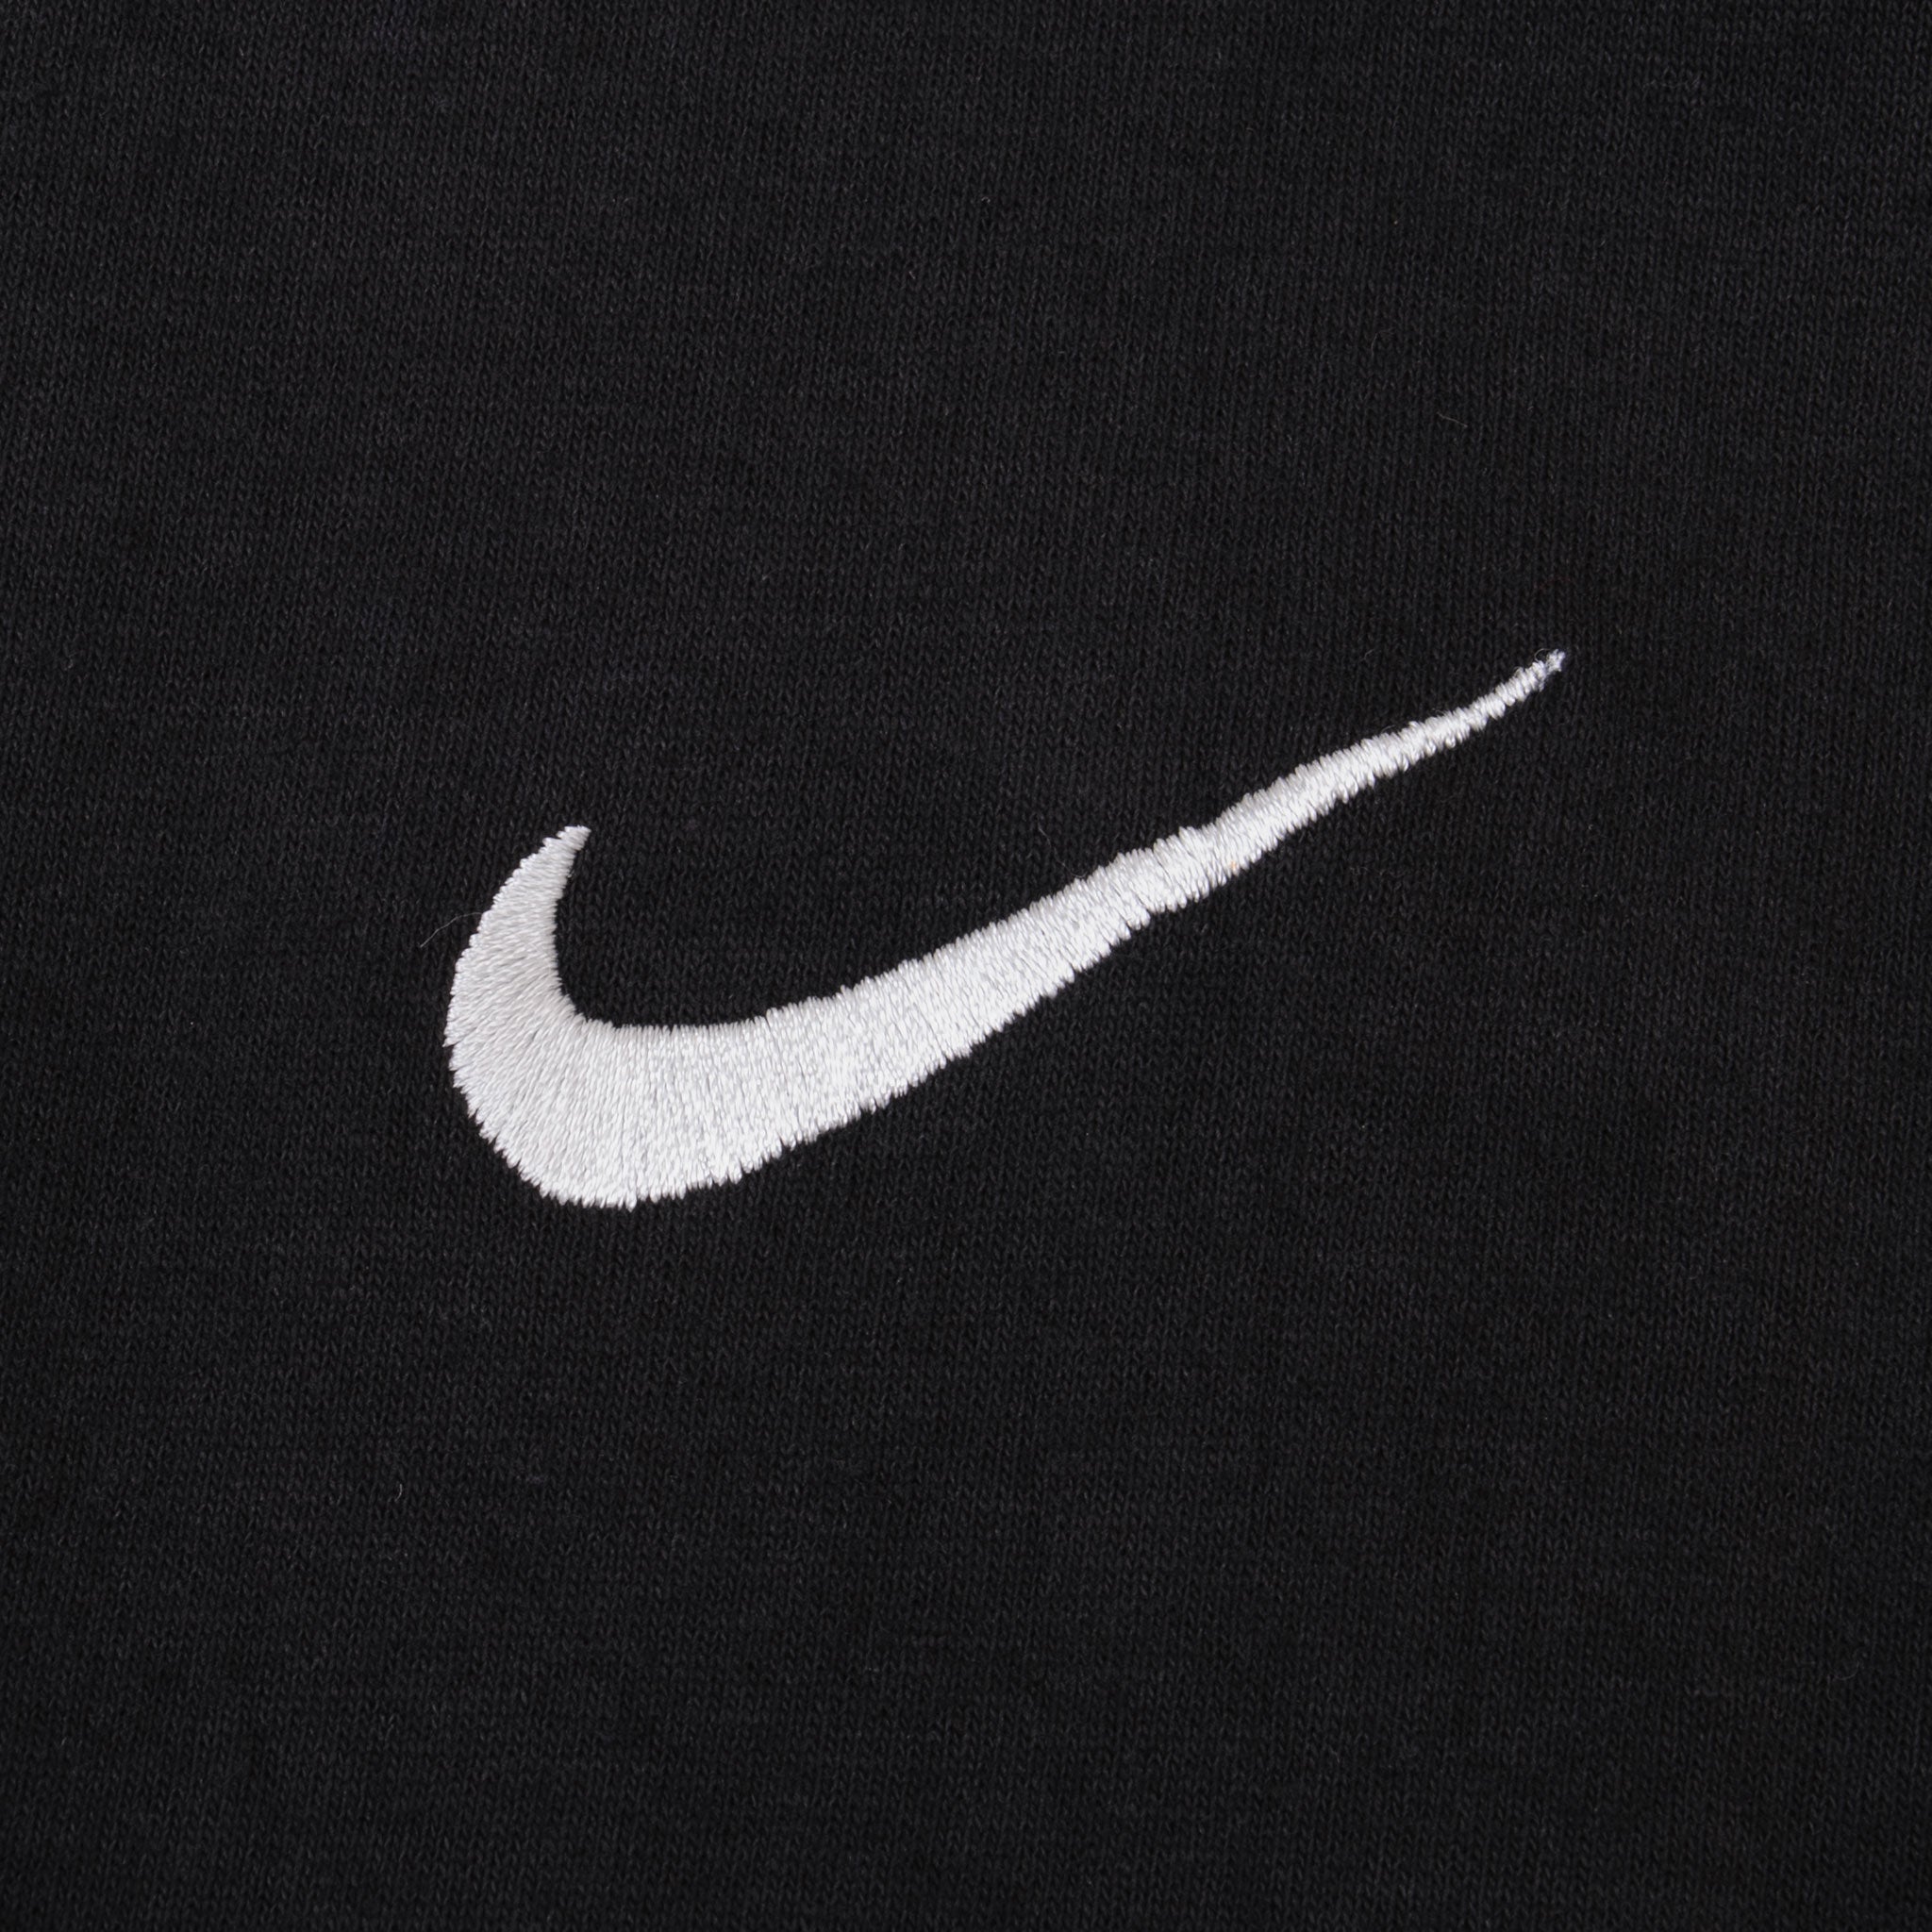 VINTAGE DEADSTOCK NIKE CLASSIC SWOOSH TEE SHIRT 1990S SIZE LARGE MADE IN USA